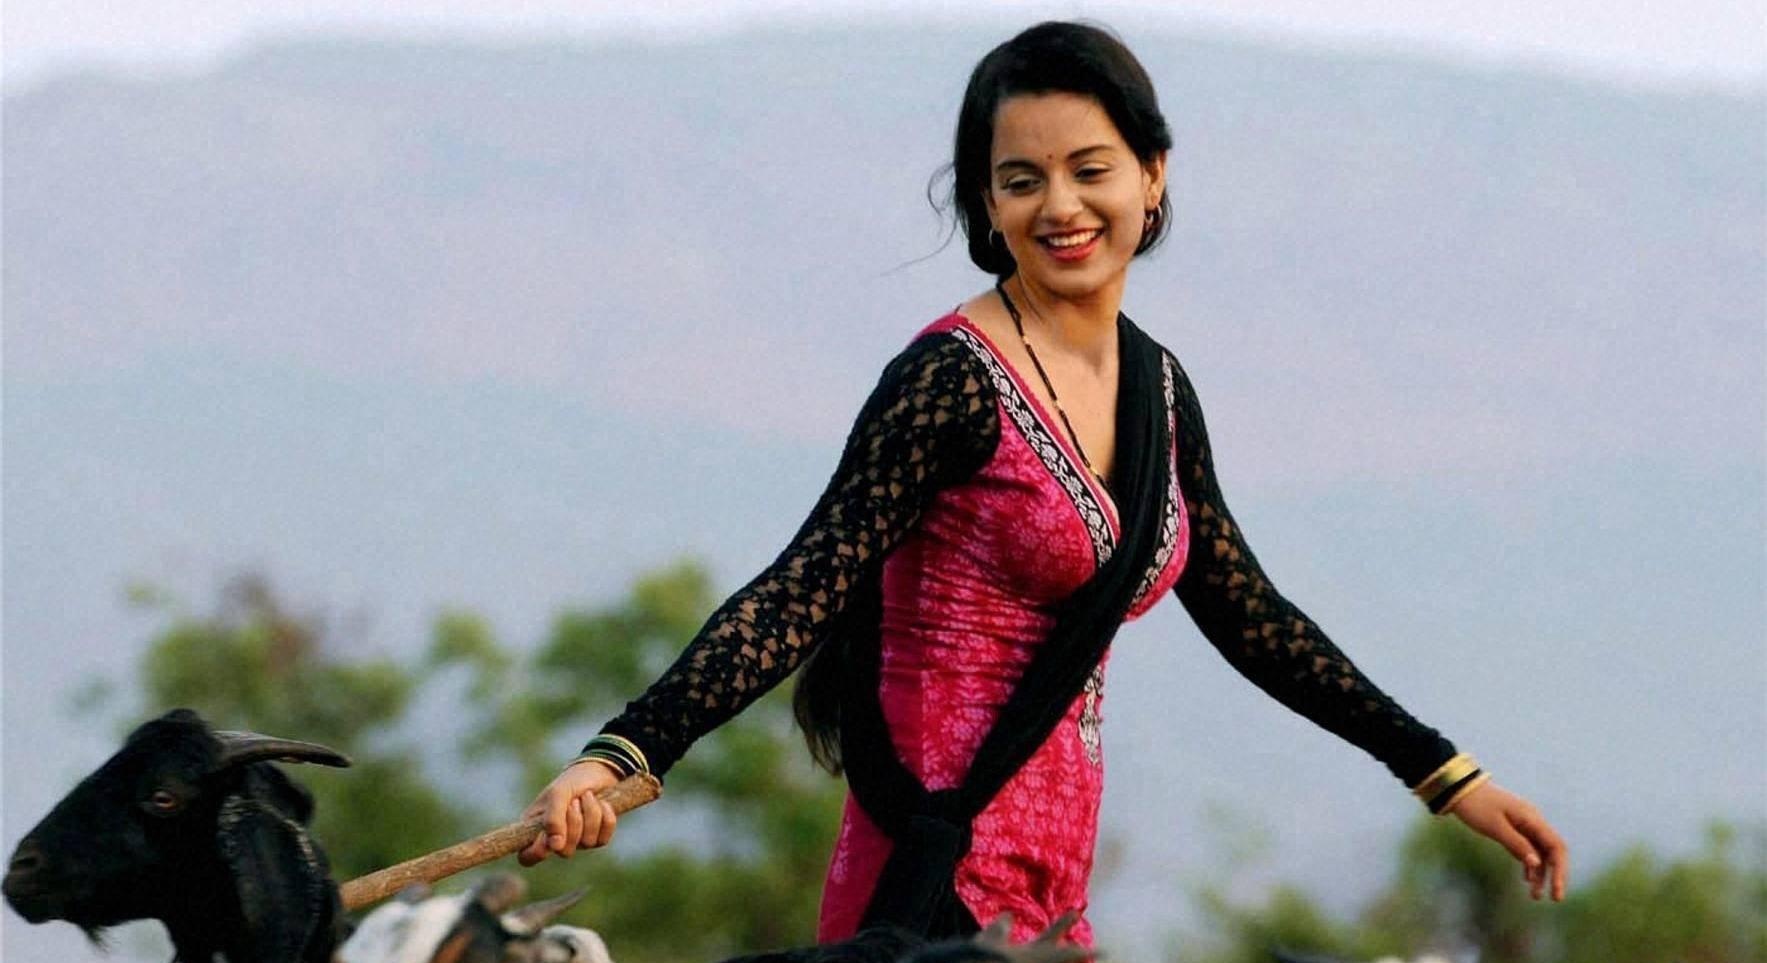 Lovely Kangana Ranaut Smiling With Goat Deskop Background Mobile Hd Images Free